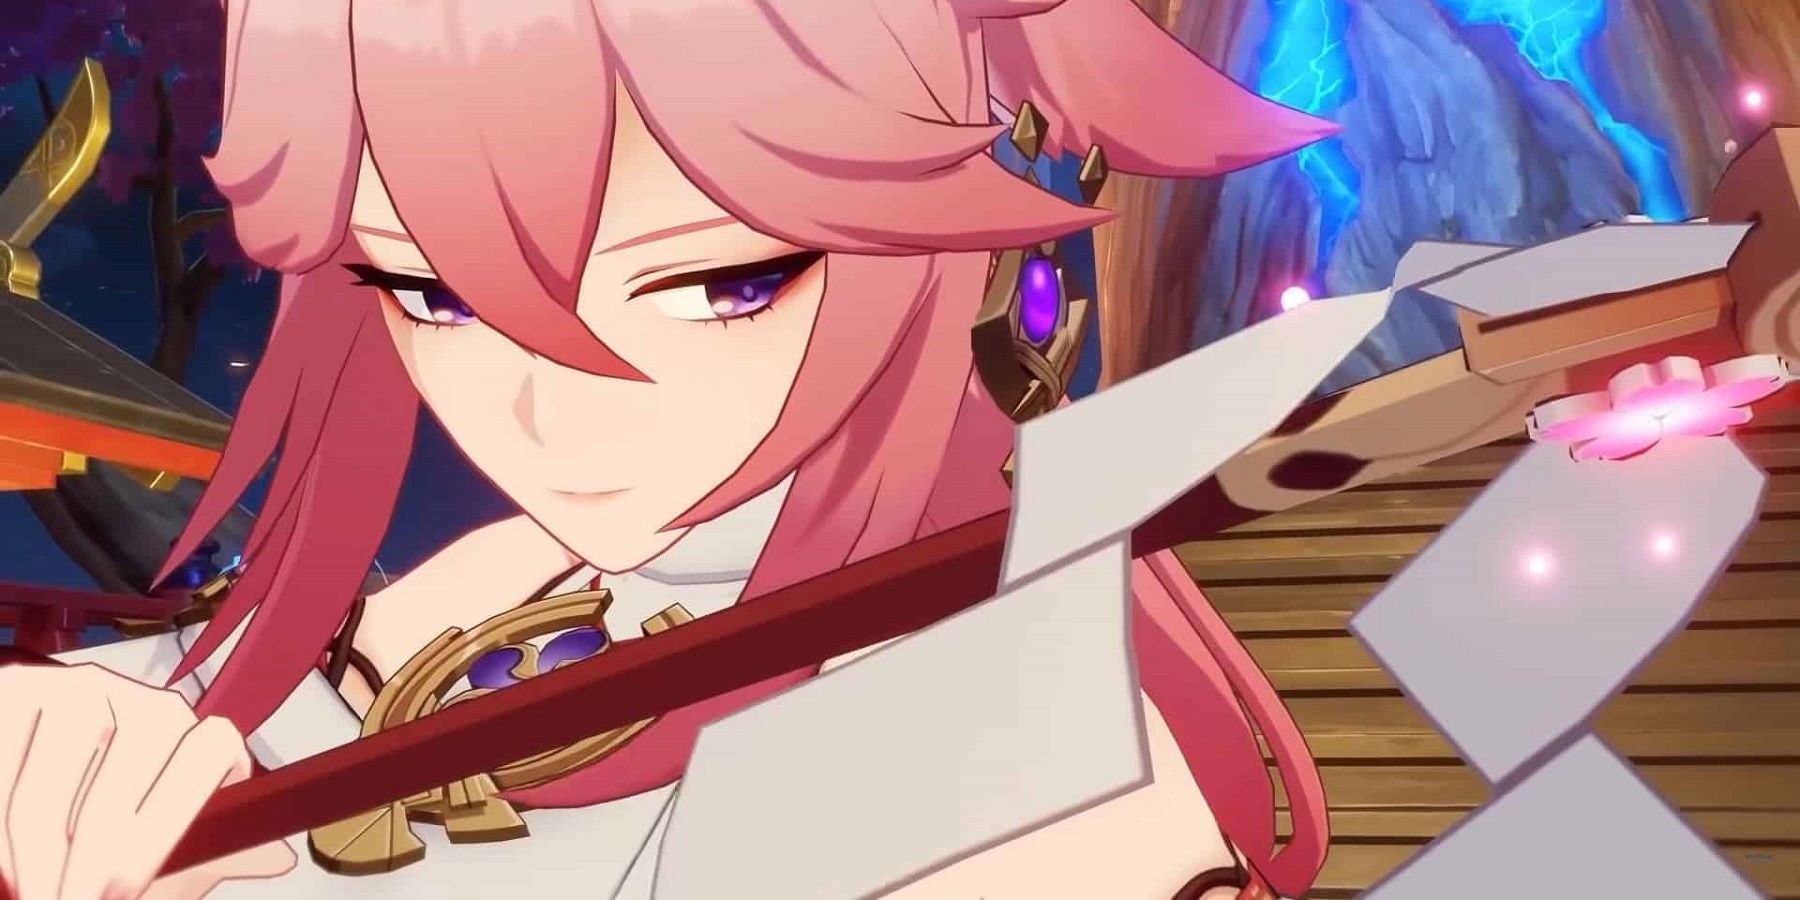 Yae Miko from Genshin Impact holding her wand in a battle stance.